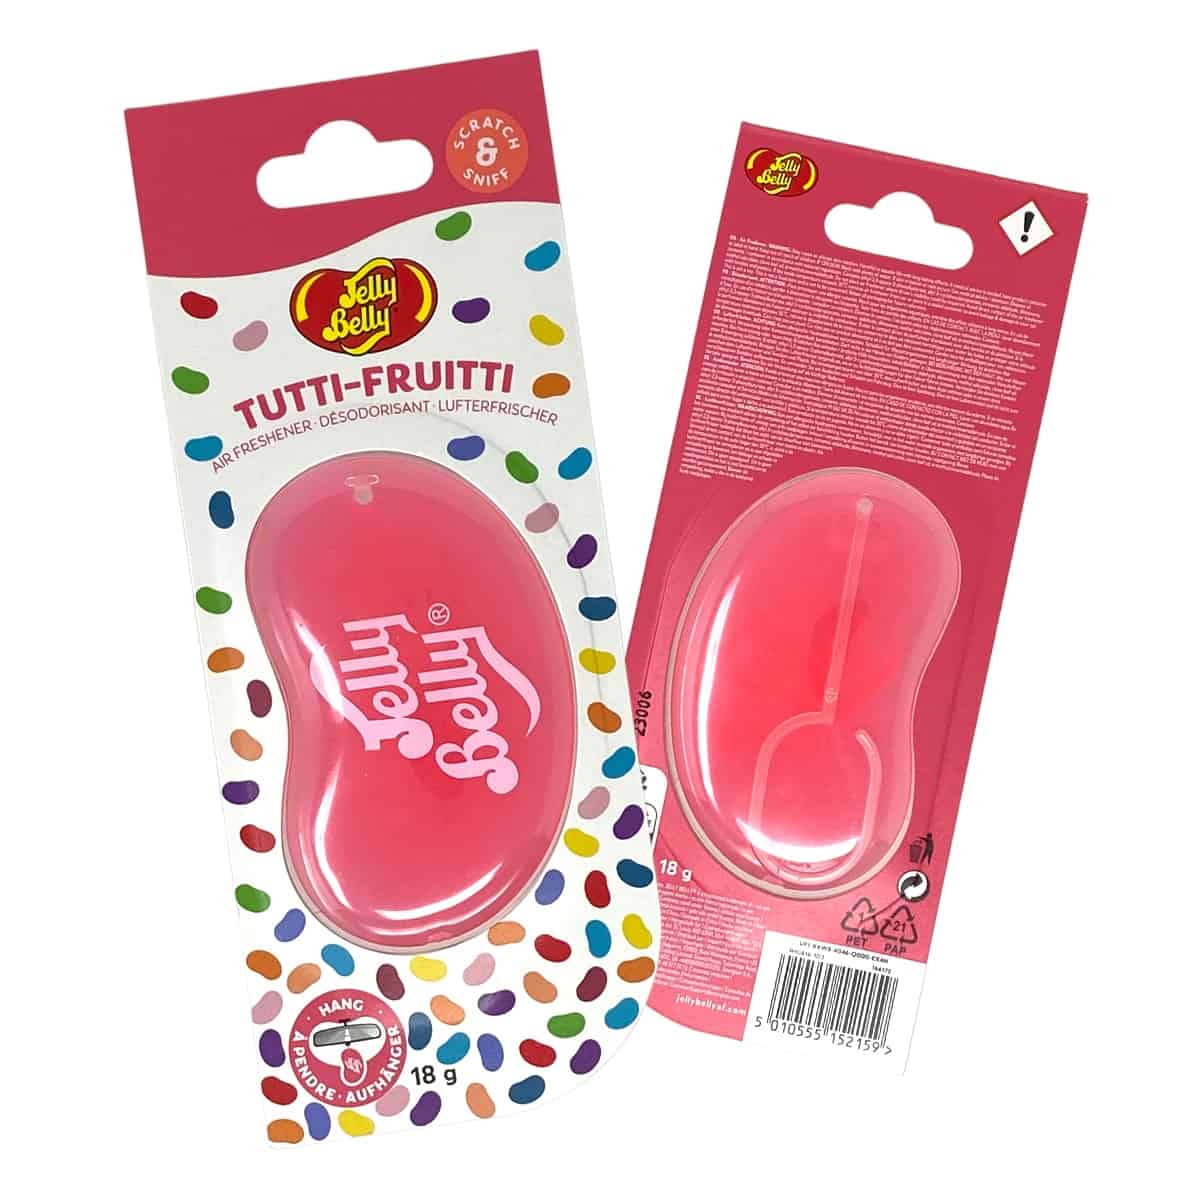 Whether you're looking to enhance the ambiance of your car, home, or office, the Jelly Belly 3D Tutti Frutti Air Freshener is the ideal choice. Its hanging gel design ensures convenient placement wherever you desire, without taking up valuable space.